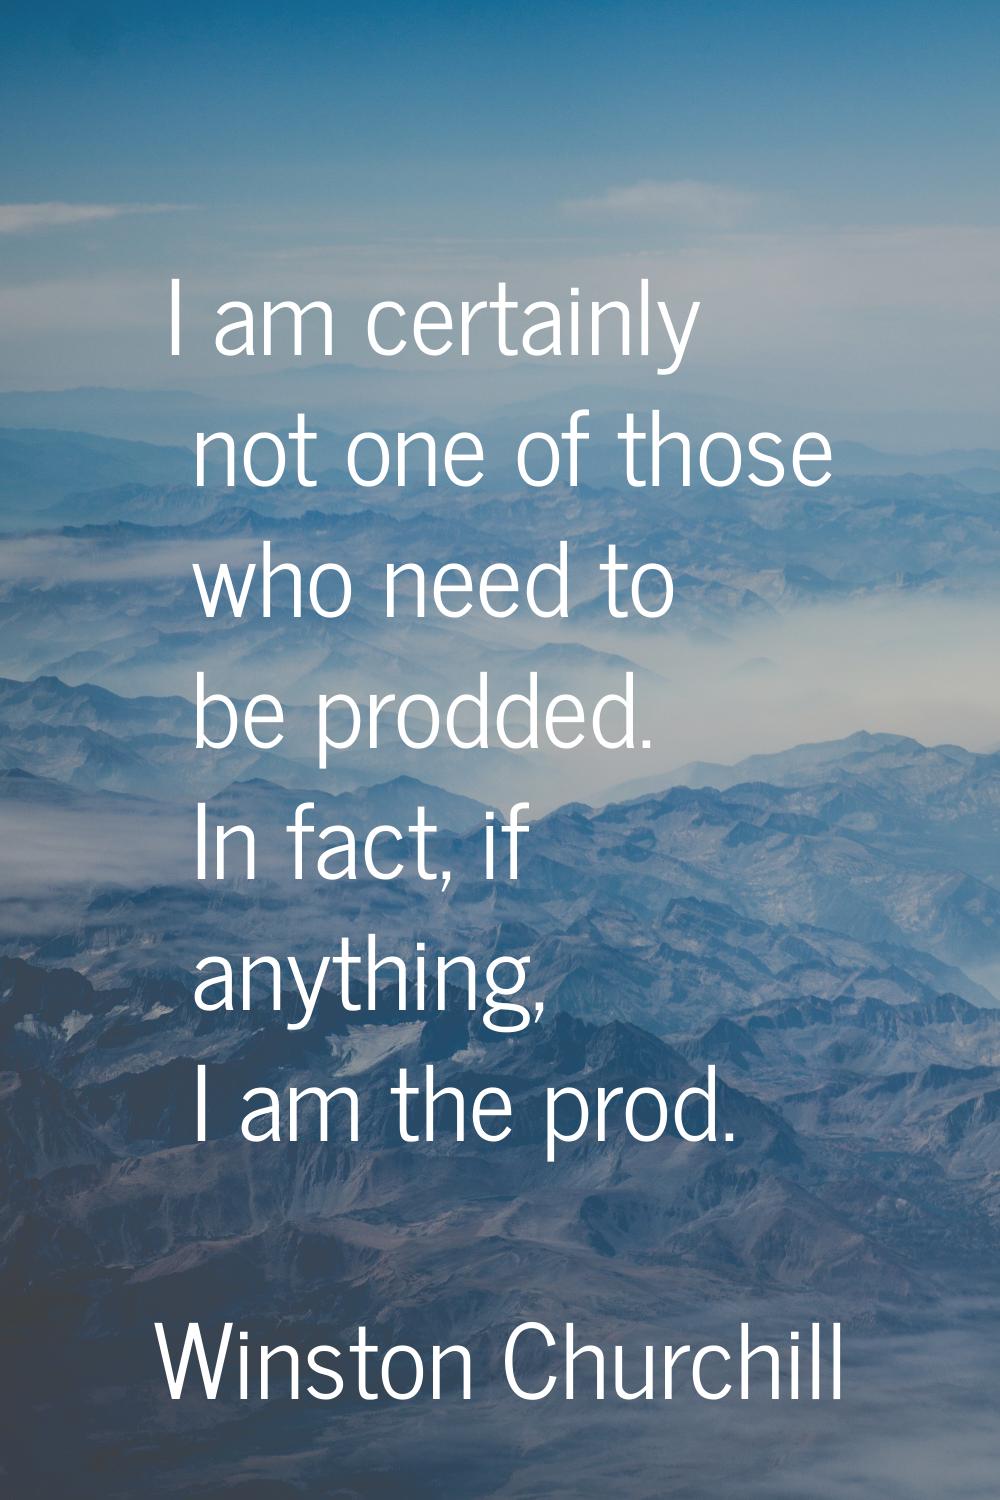 I am certainly not one of those who need to be prodded. In fact, if anything, I am the prod.